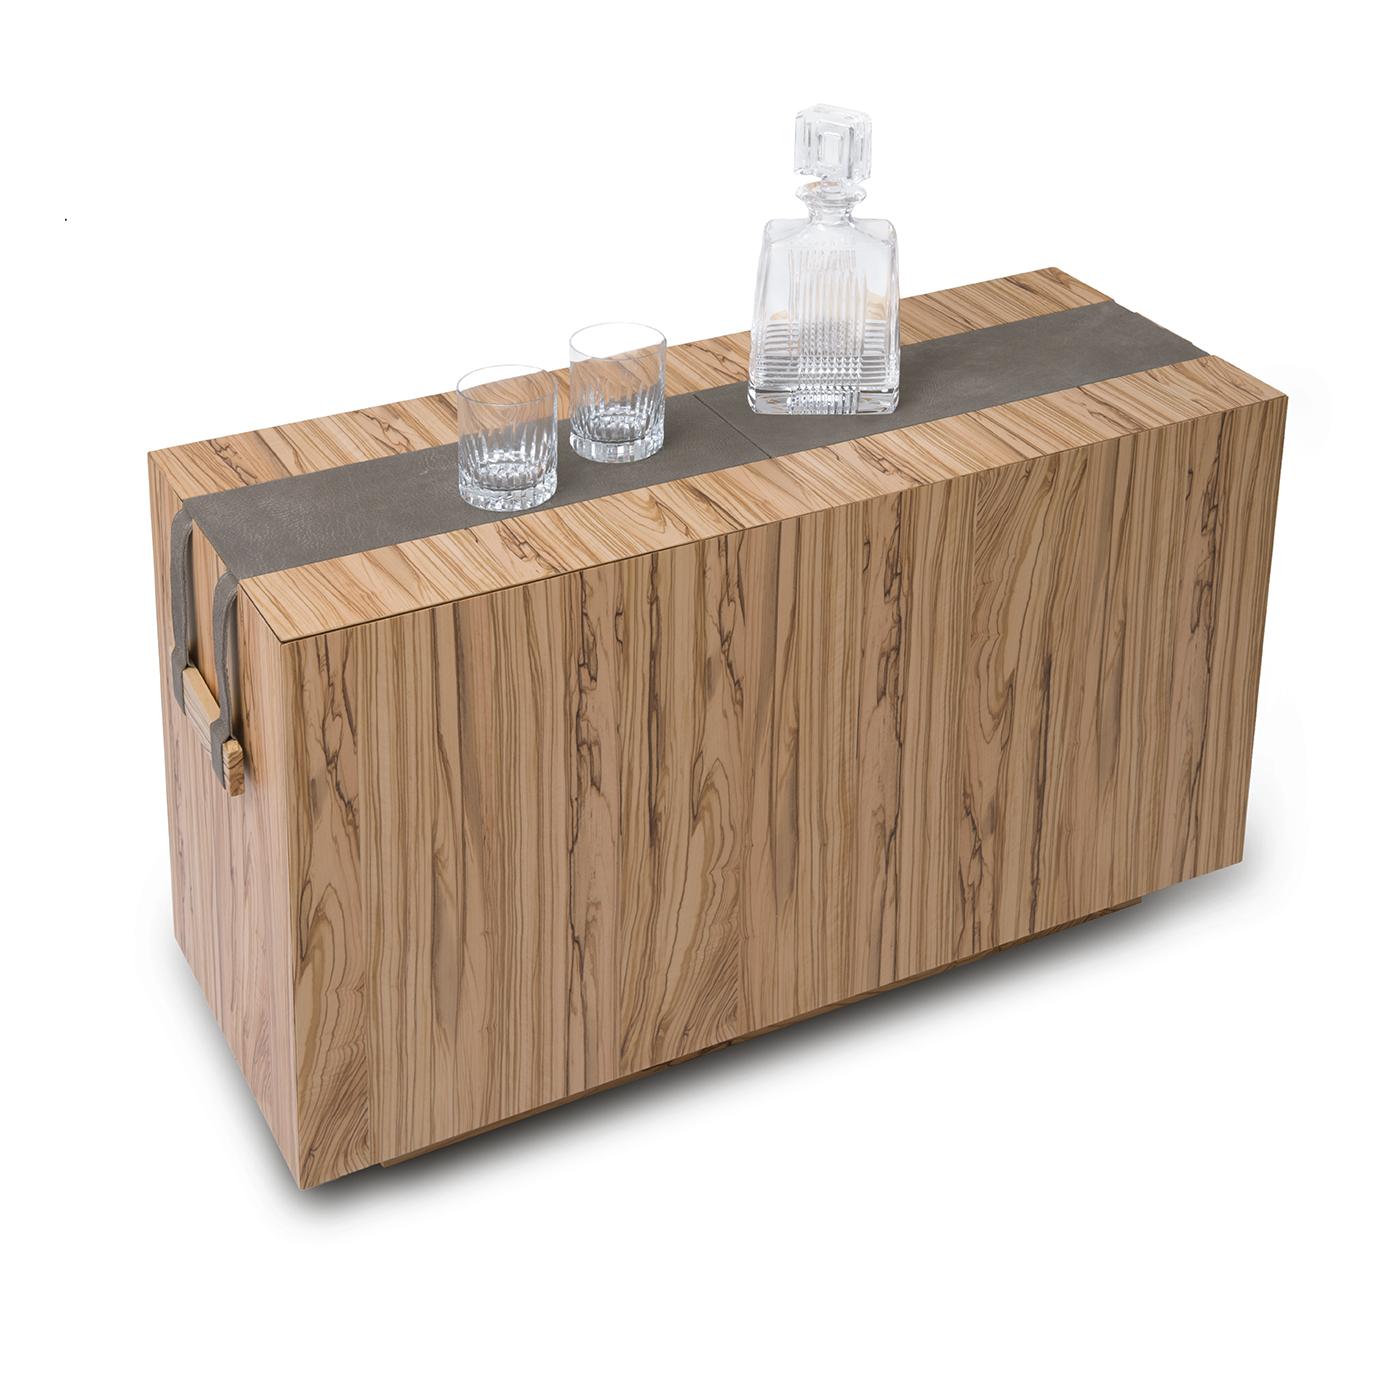 This unique, practical coffee table is perfect for any user who enjoys socializing, due to its compartment for bottles and glasses. It can also be used to organize and stow other objects, including magazines. Made from olive wood and genuine